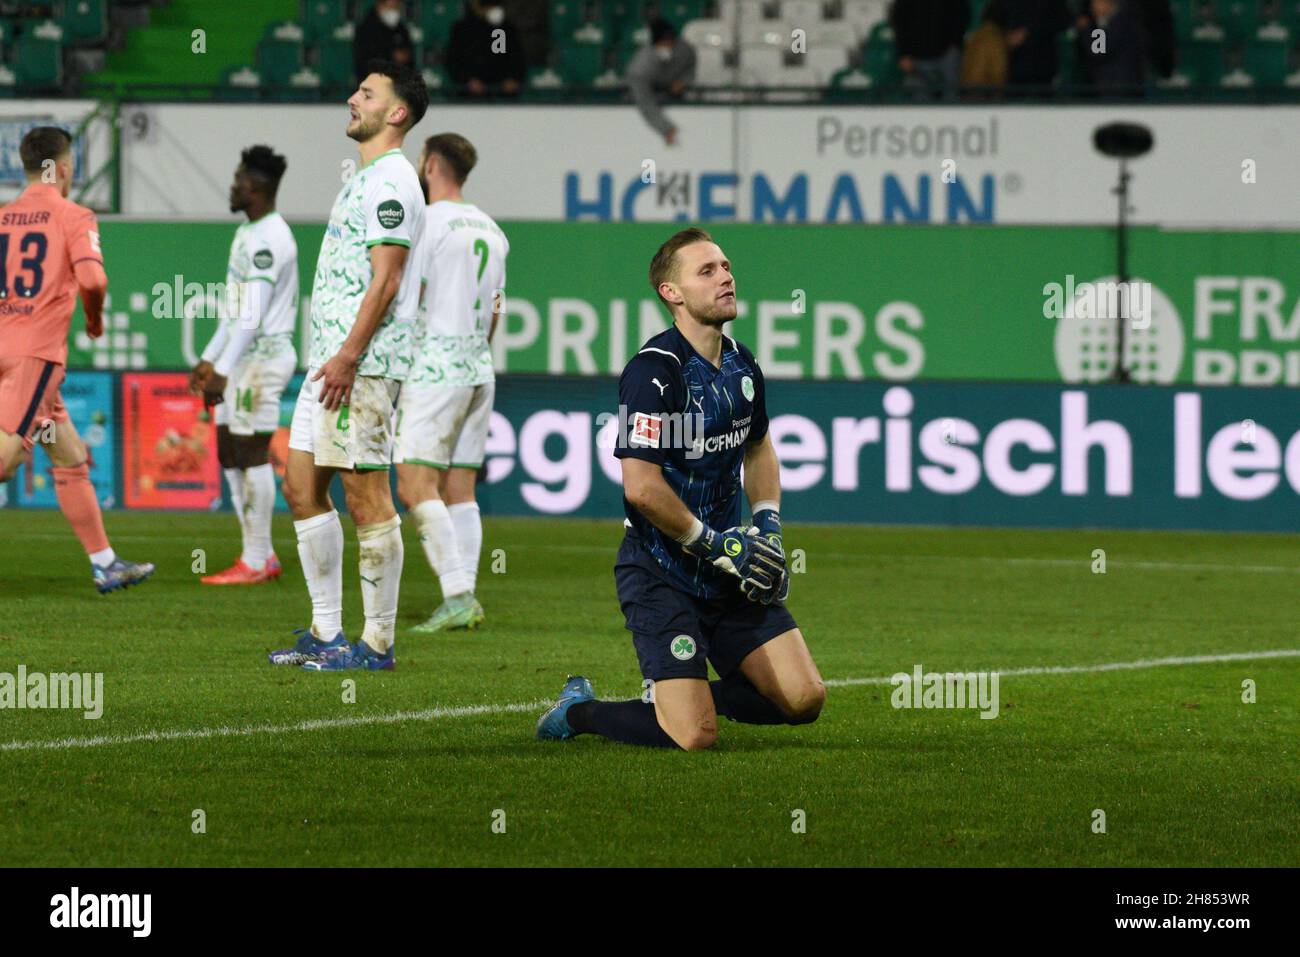 Deutschland, Fuerth, Sportpark Ronhof Thomas Sommer - 27.11.2021 - Fussball, 1.Bundesliga - SpVgg Greuther Fuerth vs. TSG 1899 Hoffenheim  Image: GK Marius Funk (SpVgg Greuther Fürth,1) kneels in shock after the the 4th goal in conceded in the 57th minute; Goalscorer was Georginio Rutter (TSG 1899 Hoffenheim, 33)  DFL regulations prohibit any use of photographs as image sequences and or quasi-video Stock Photo